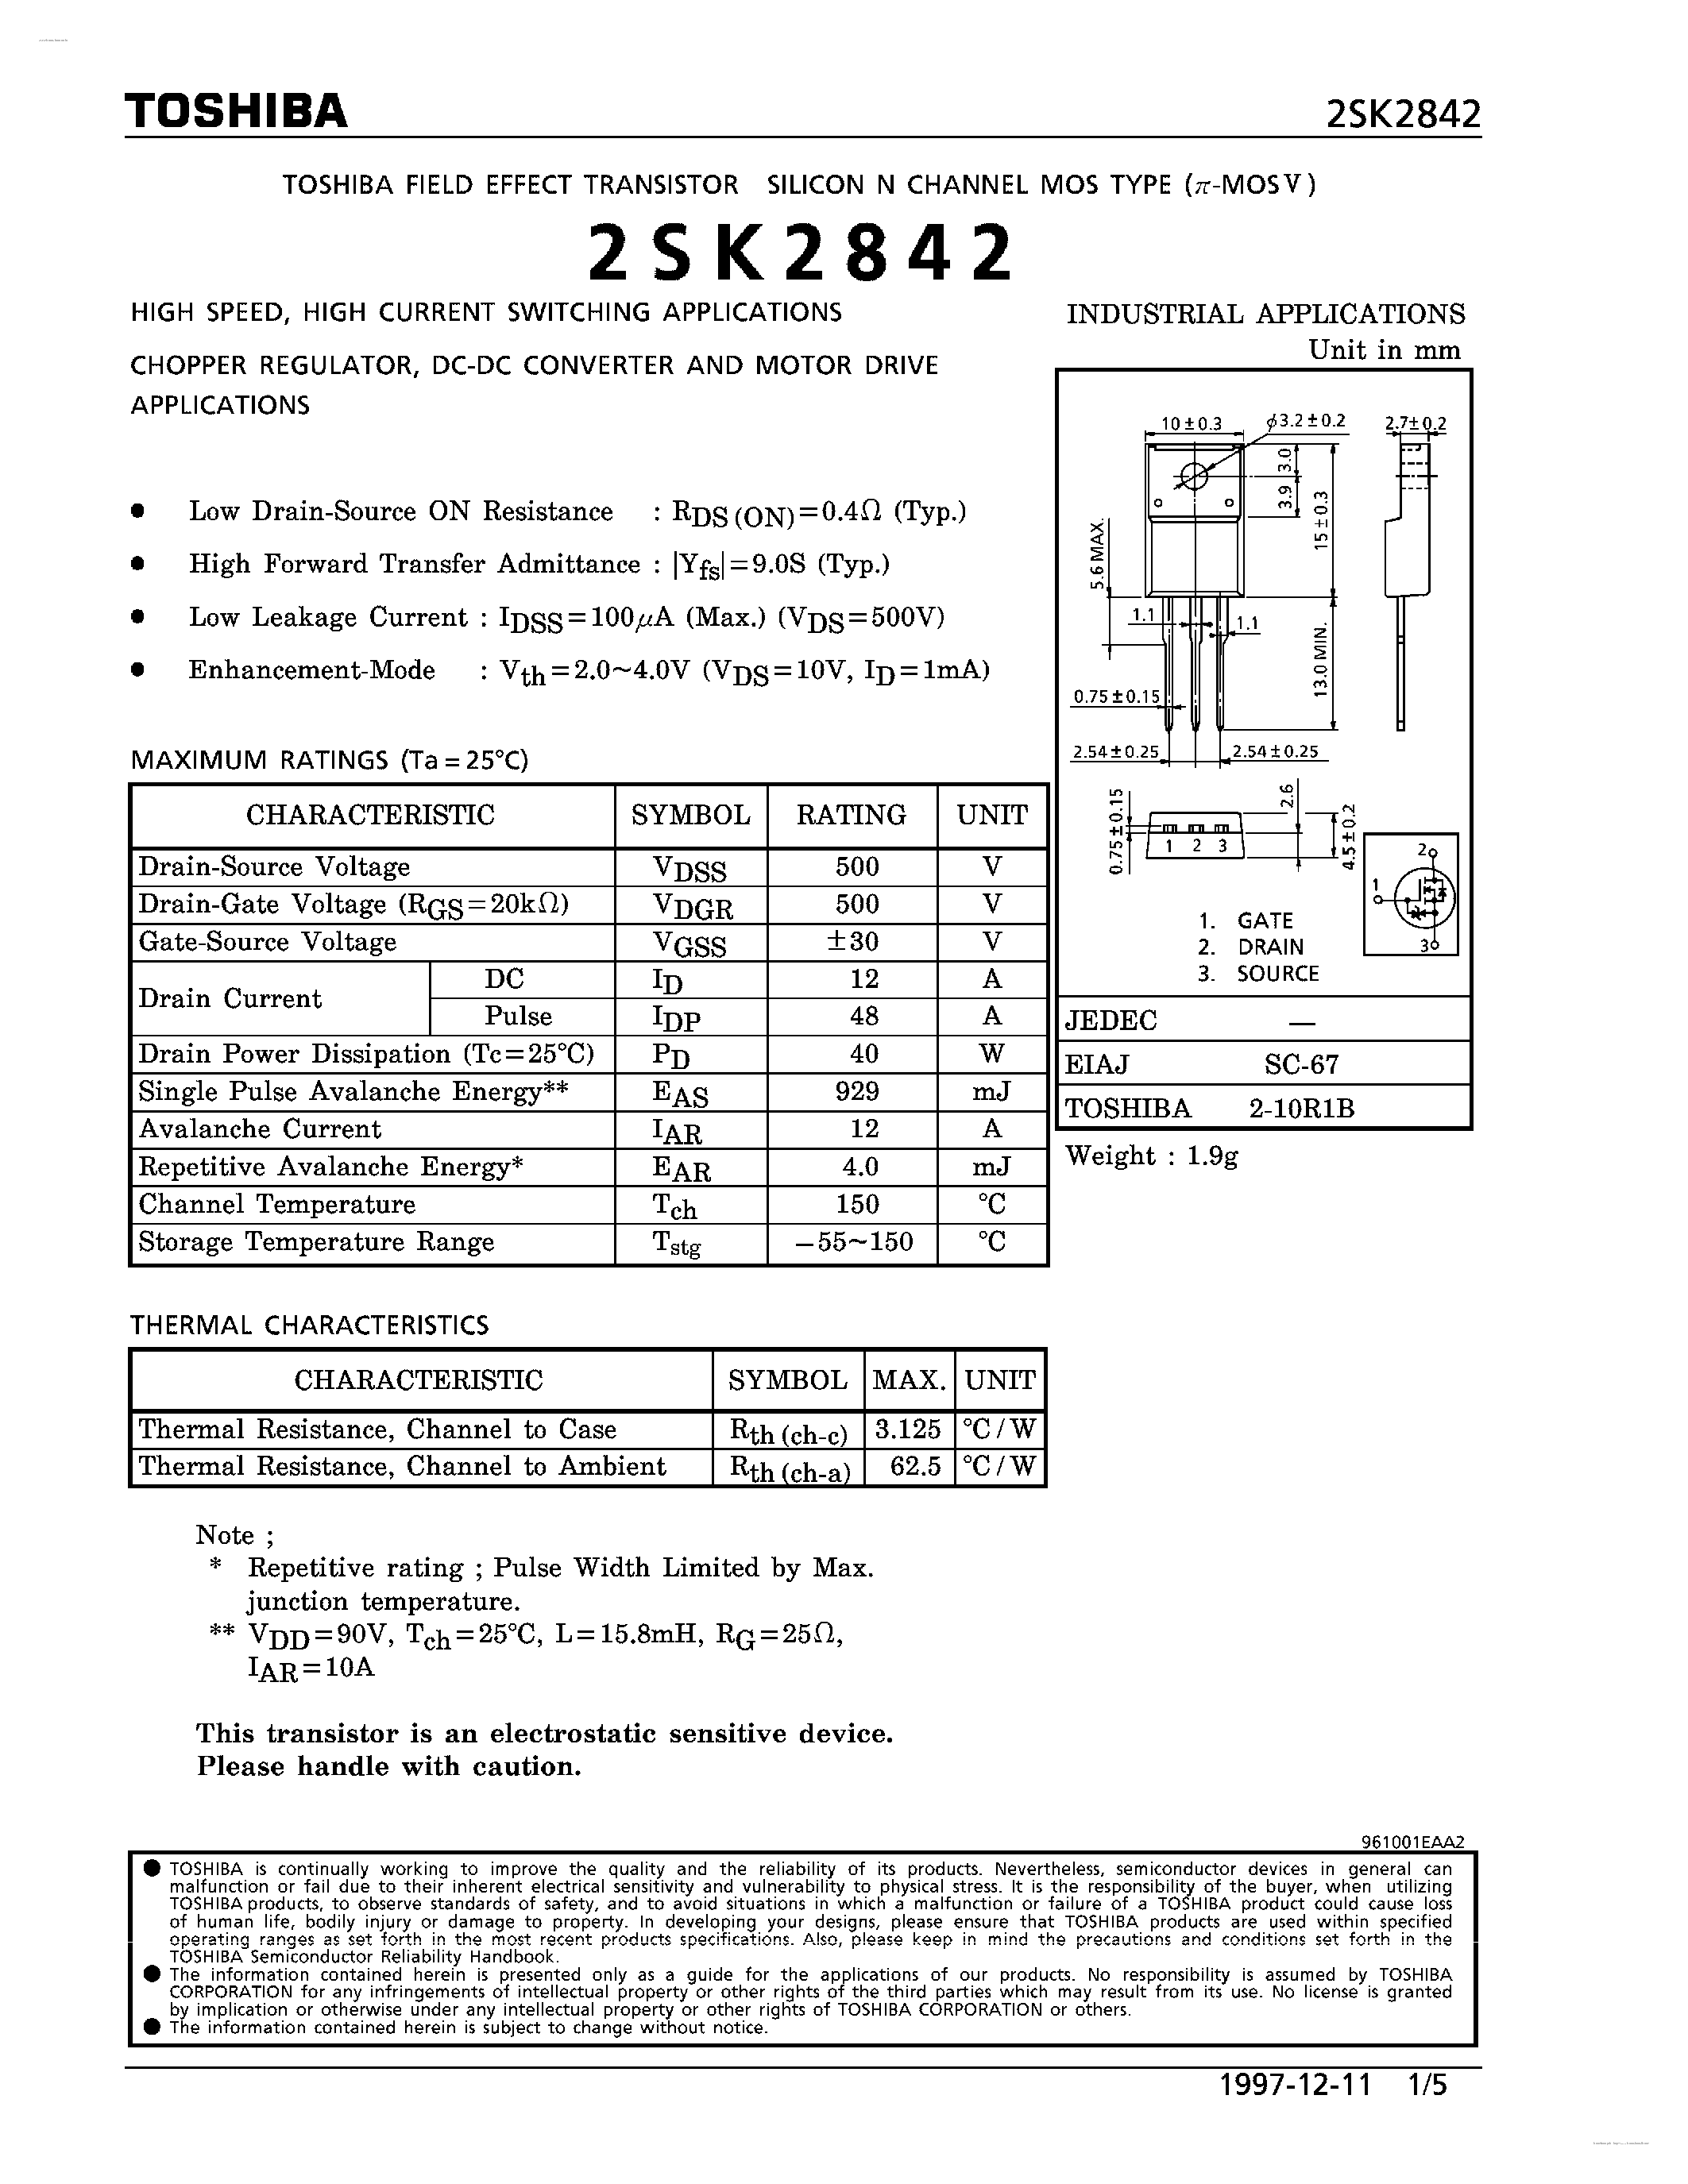 Datasheet K2842 - Search -----> 2SK2842 page 1